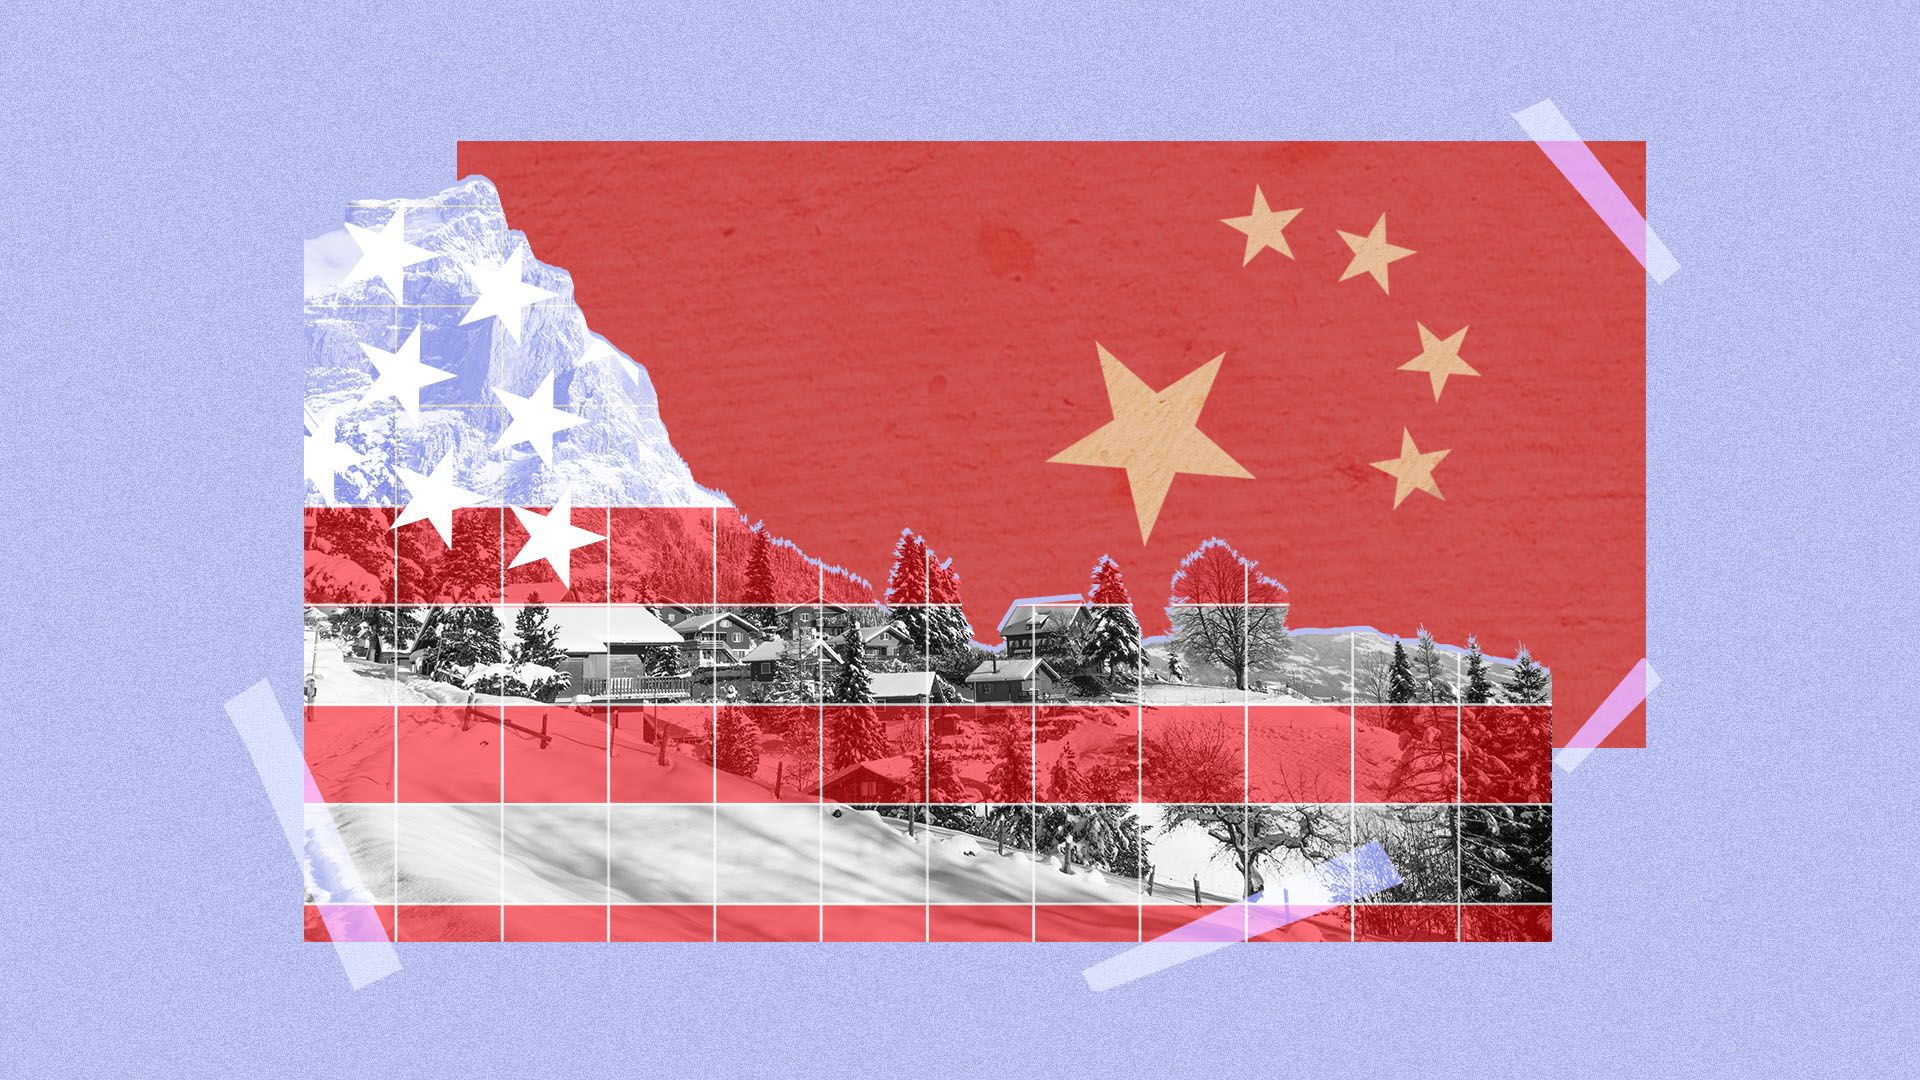 Illustration of the Swiss Alps, overlaid with elements of the American and Chinese flags